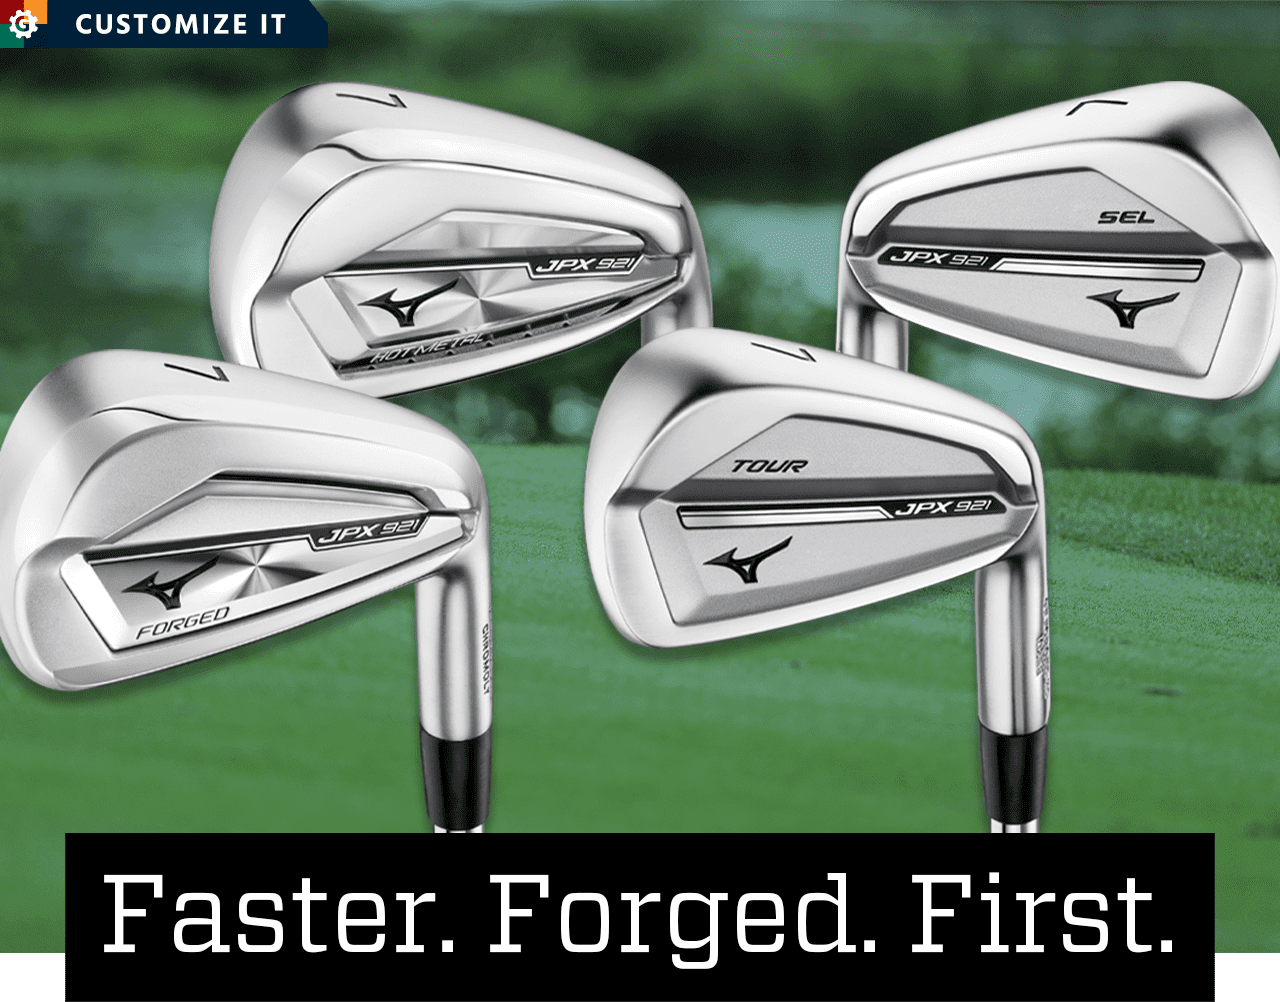 Faster. Forged. First. Customize it.